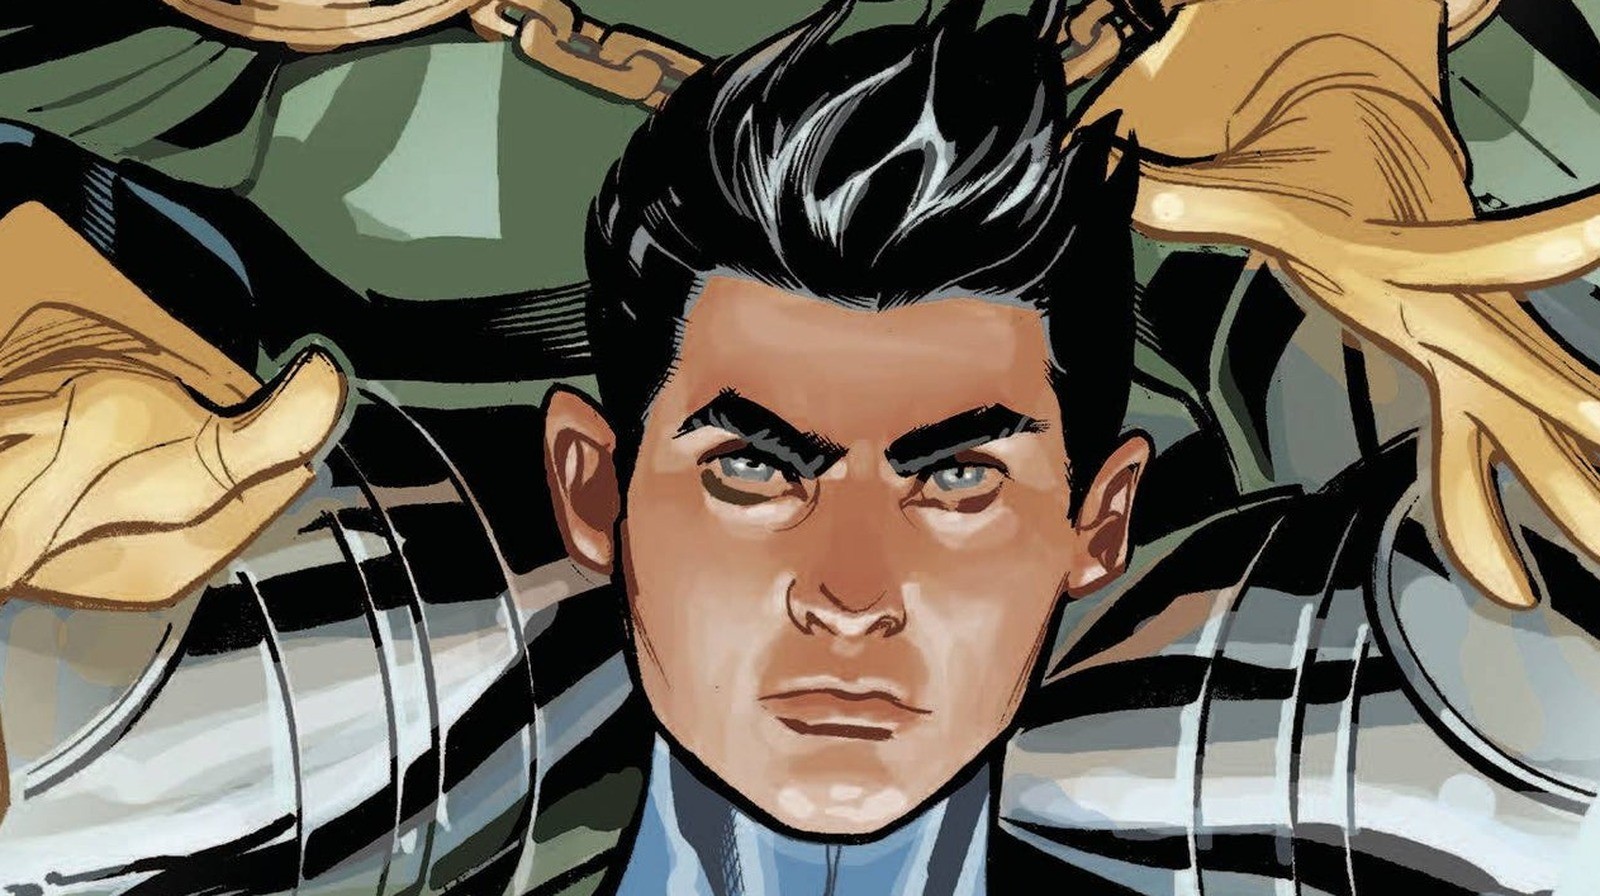 Franklin Richards might be introduced in X-Men '97 season 2 (credits: Marvel Comics)